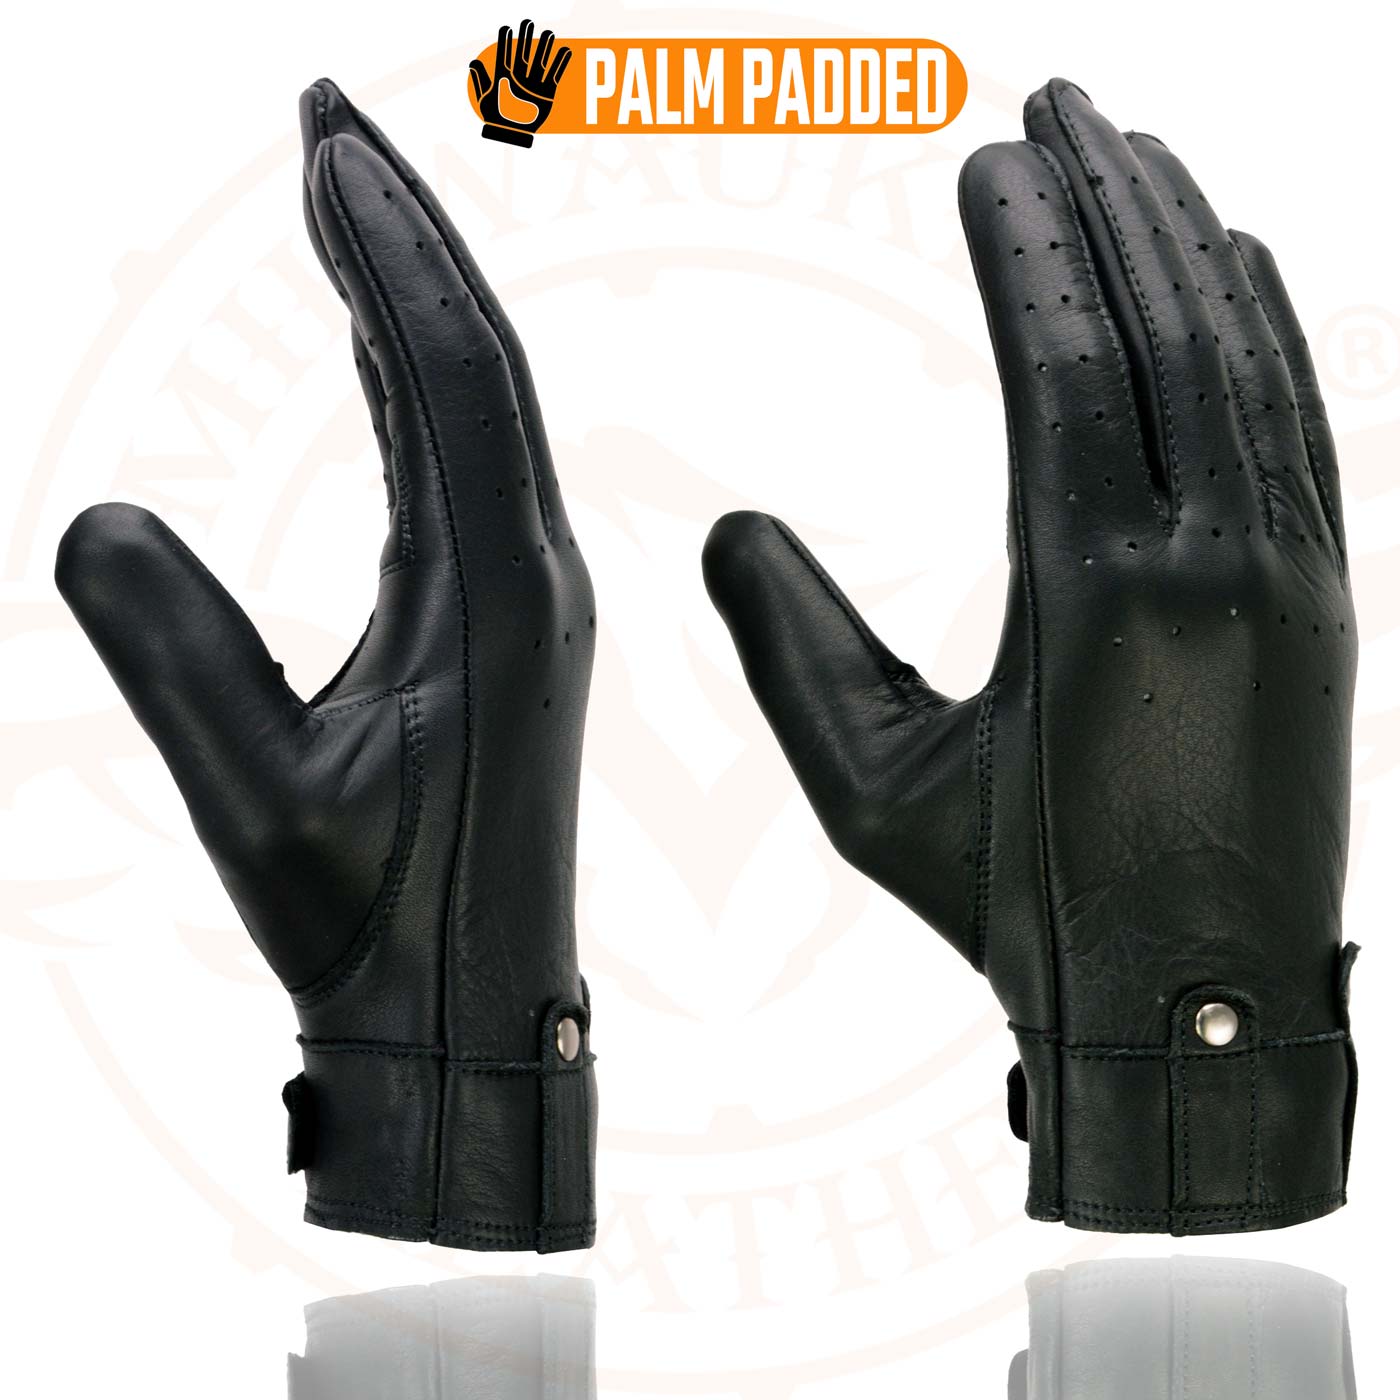 Milwaukee Leather MG7710 Women's Black Perforated Leather Gel Palm Lightweight Motorcycle Hand Gloves W/ Wrist Loops